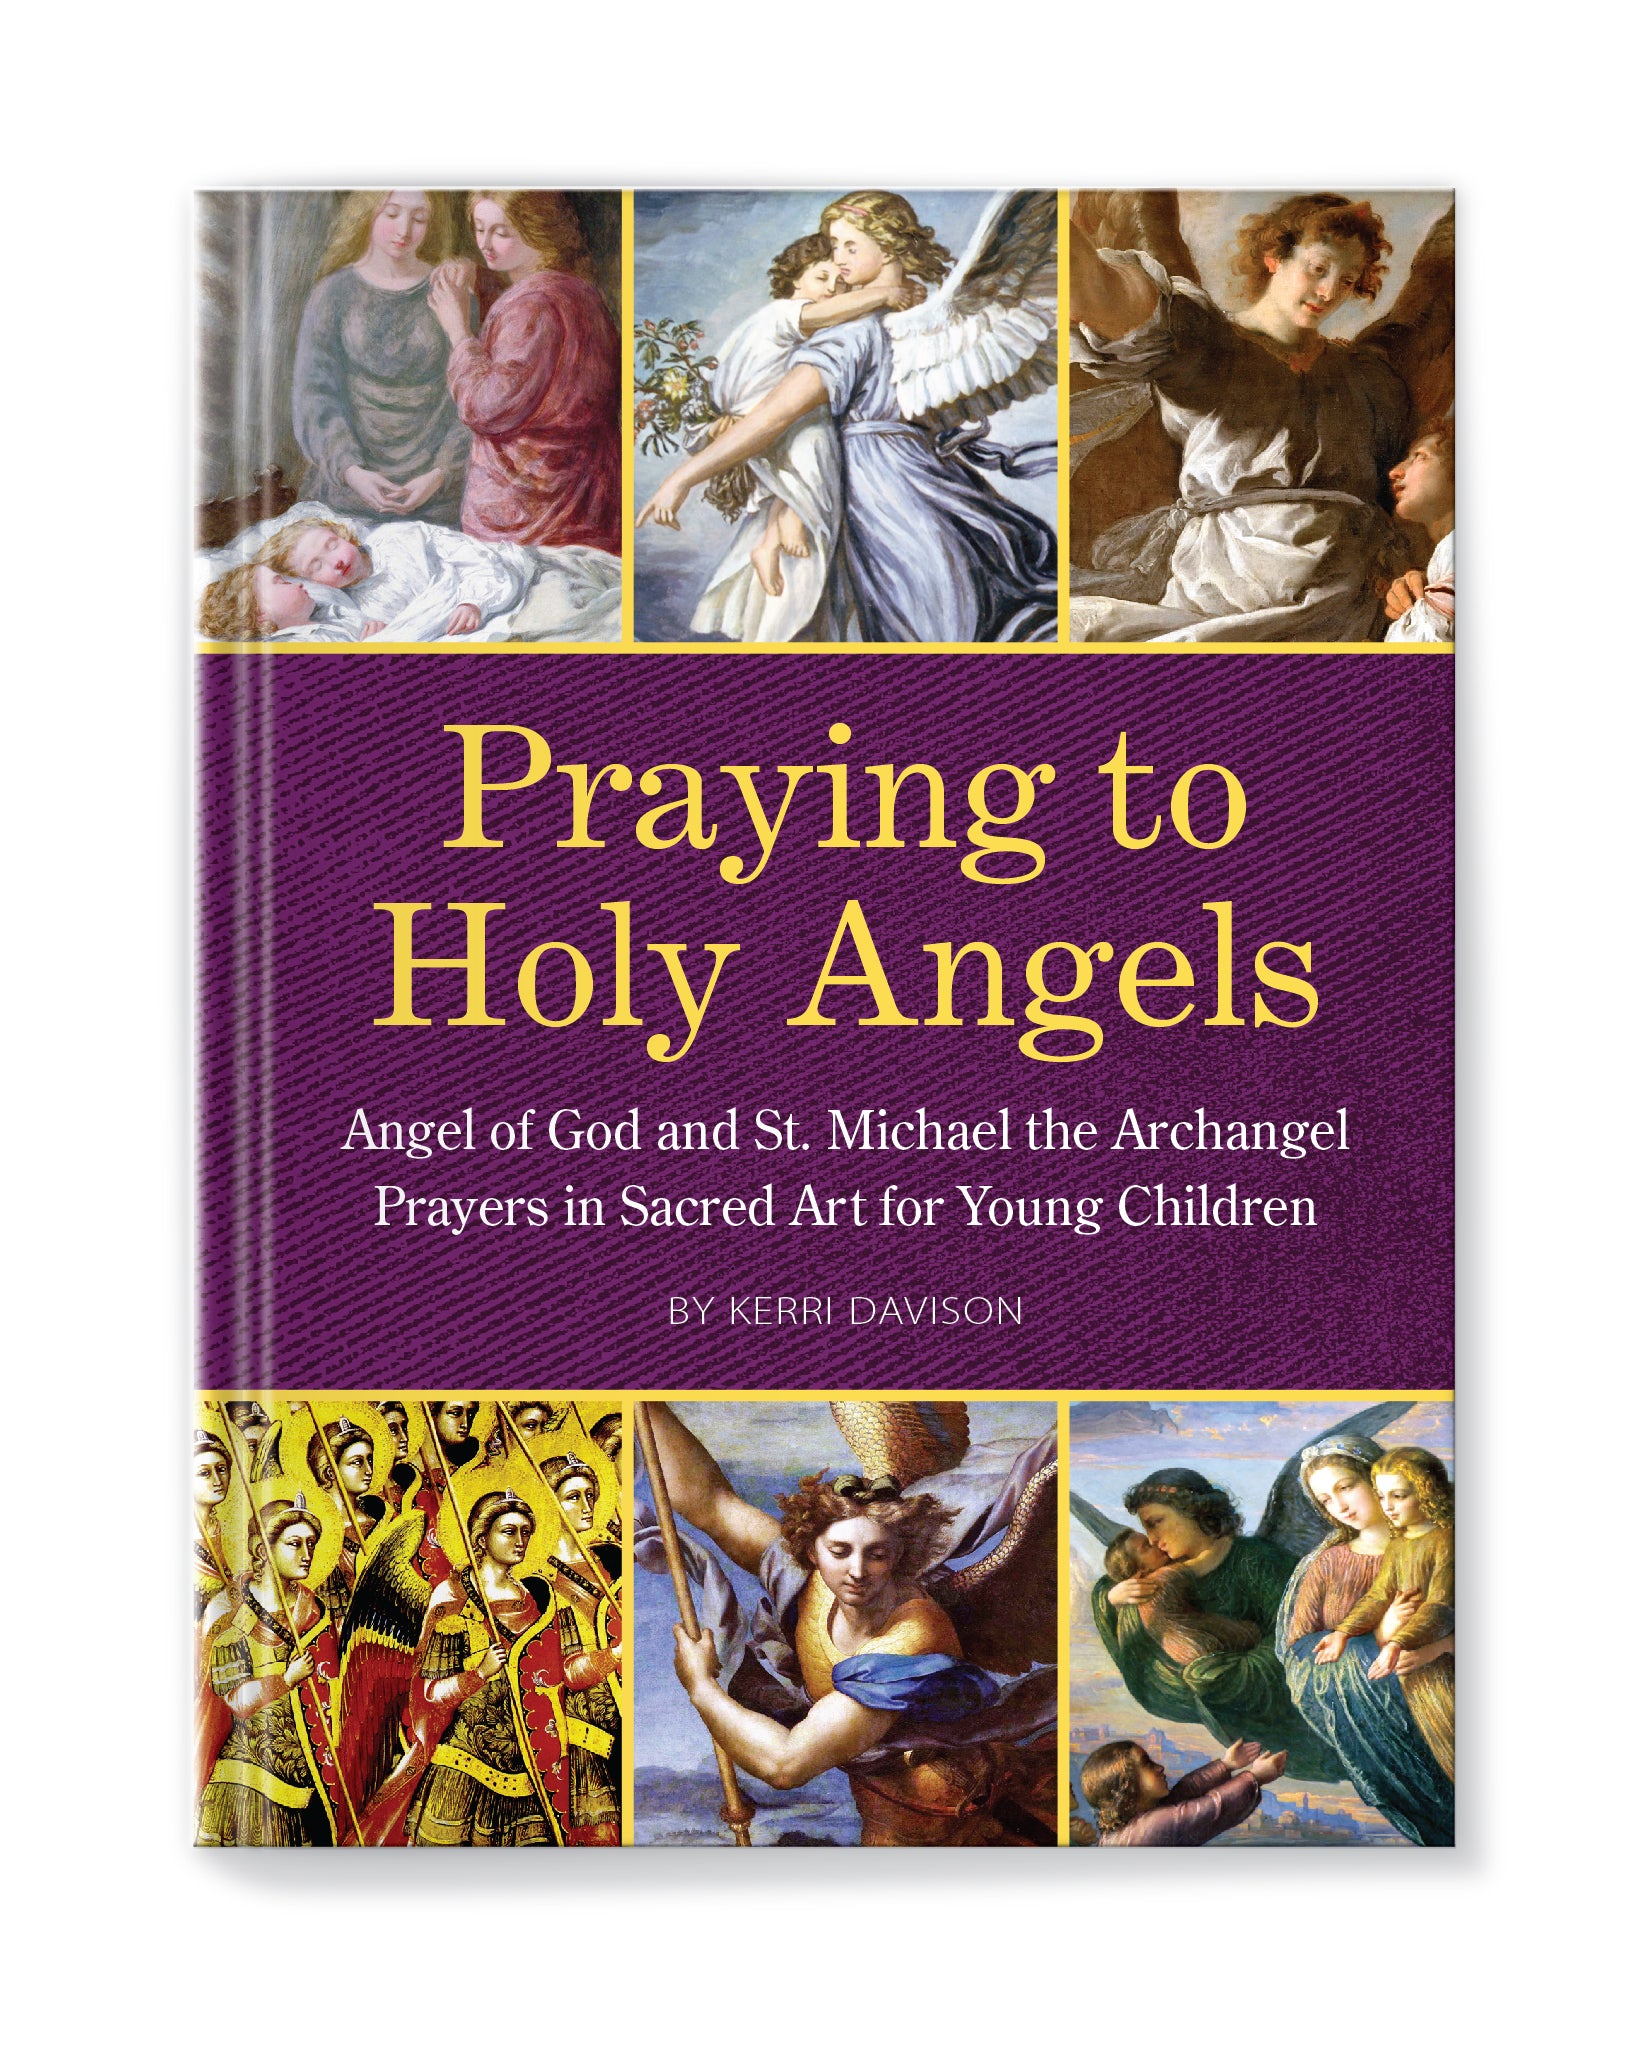 Praying to Holy Angels: Angel of God and St. Michael the Archangel Prayers in Sacred Art for Young Children - Holy Heroes